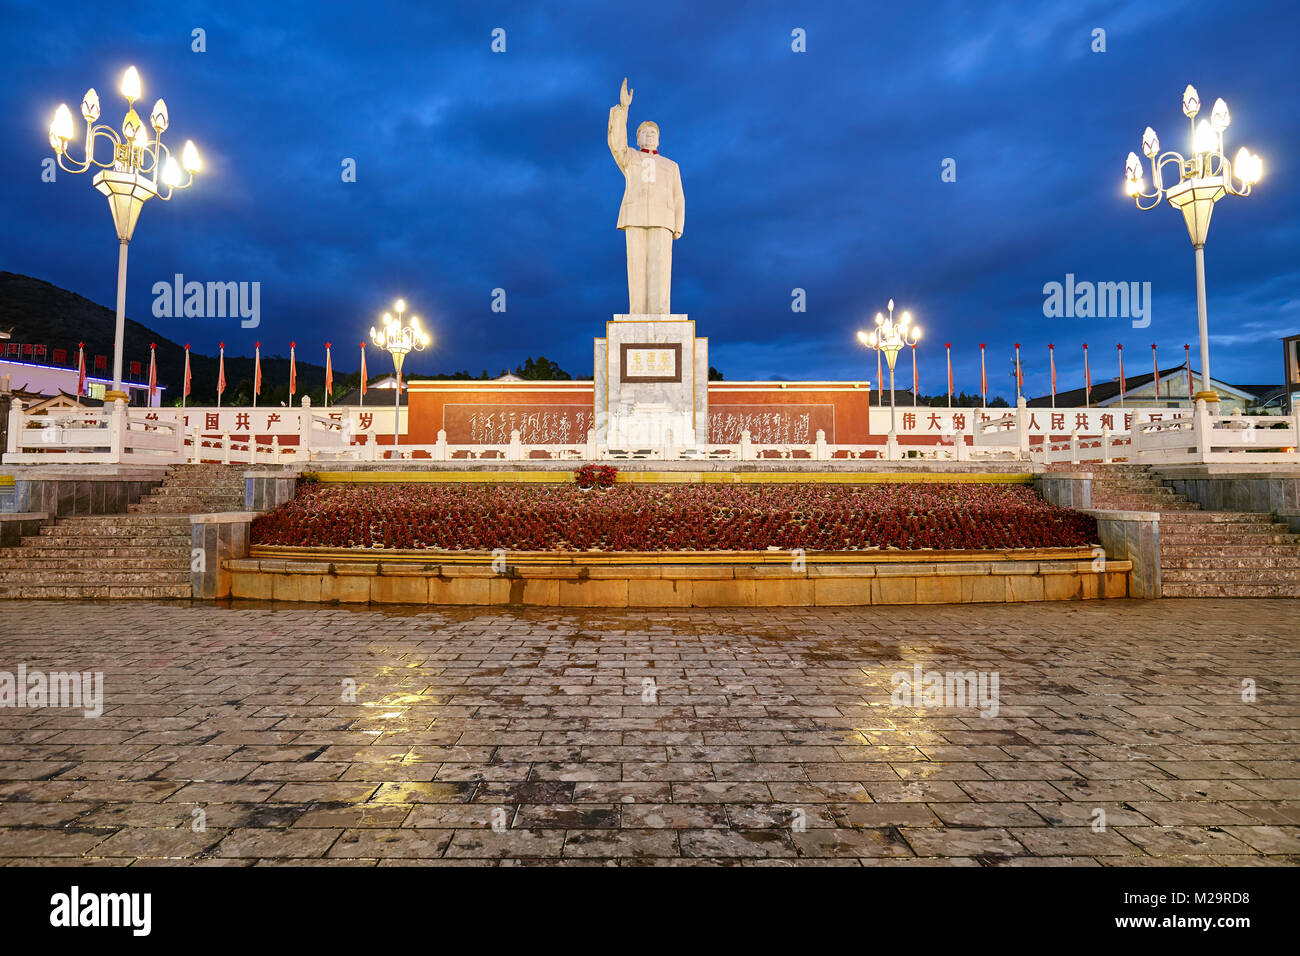 Lijiang, China - September 22, 2017: Mao Tse Tung statue in the Red Sun Square at night. Stock Photo